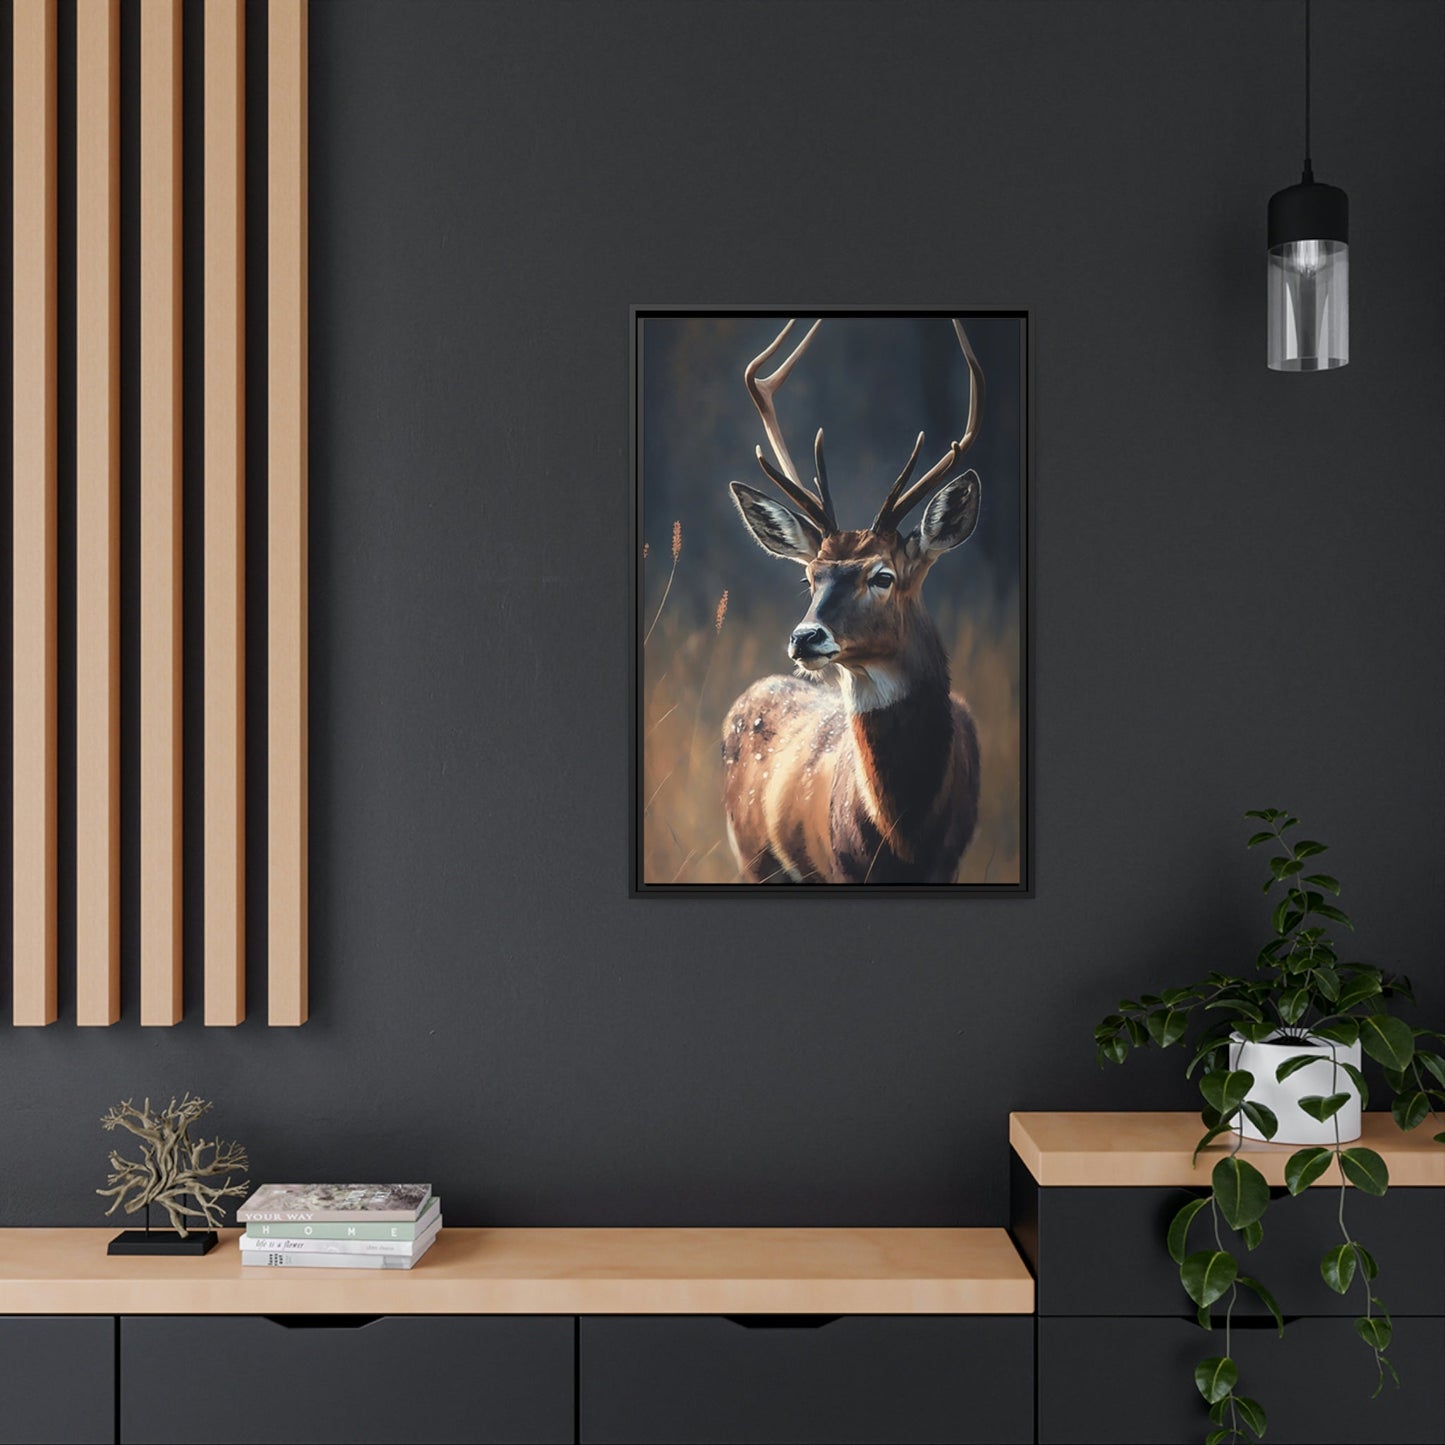 The Spirit of Deer: A Canvas Artistic Collection